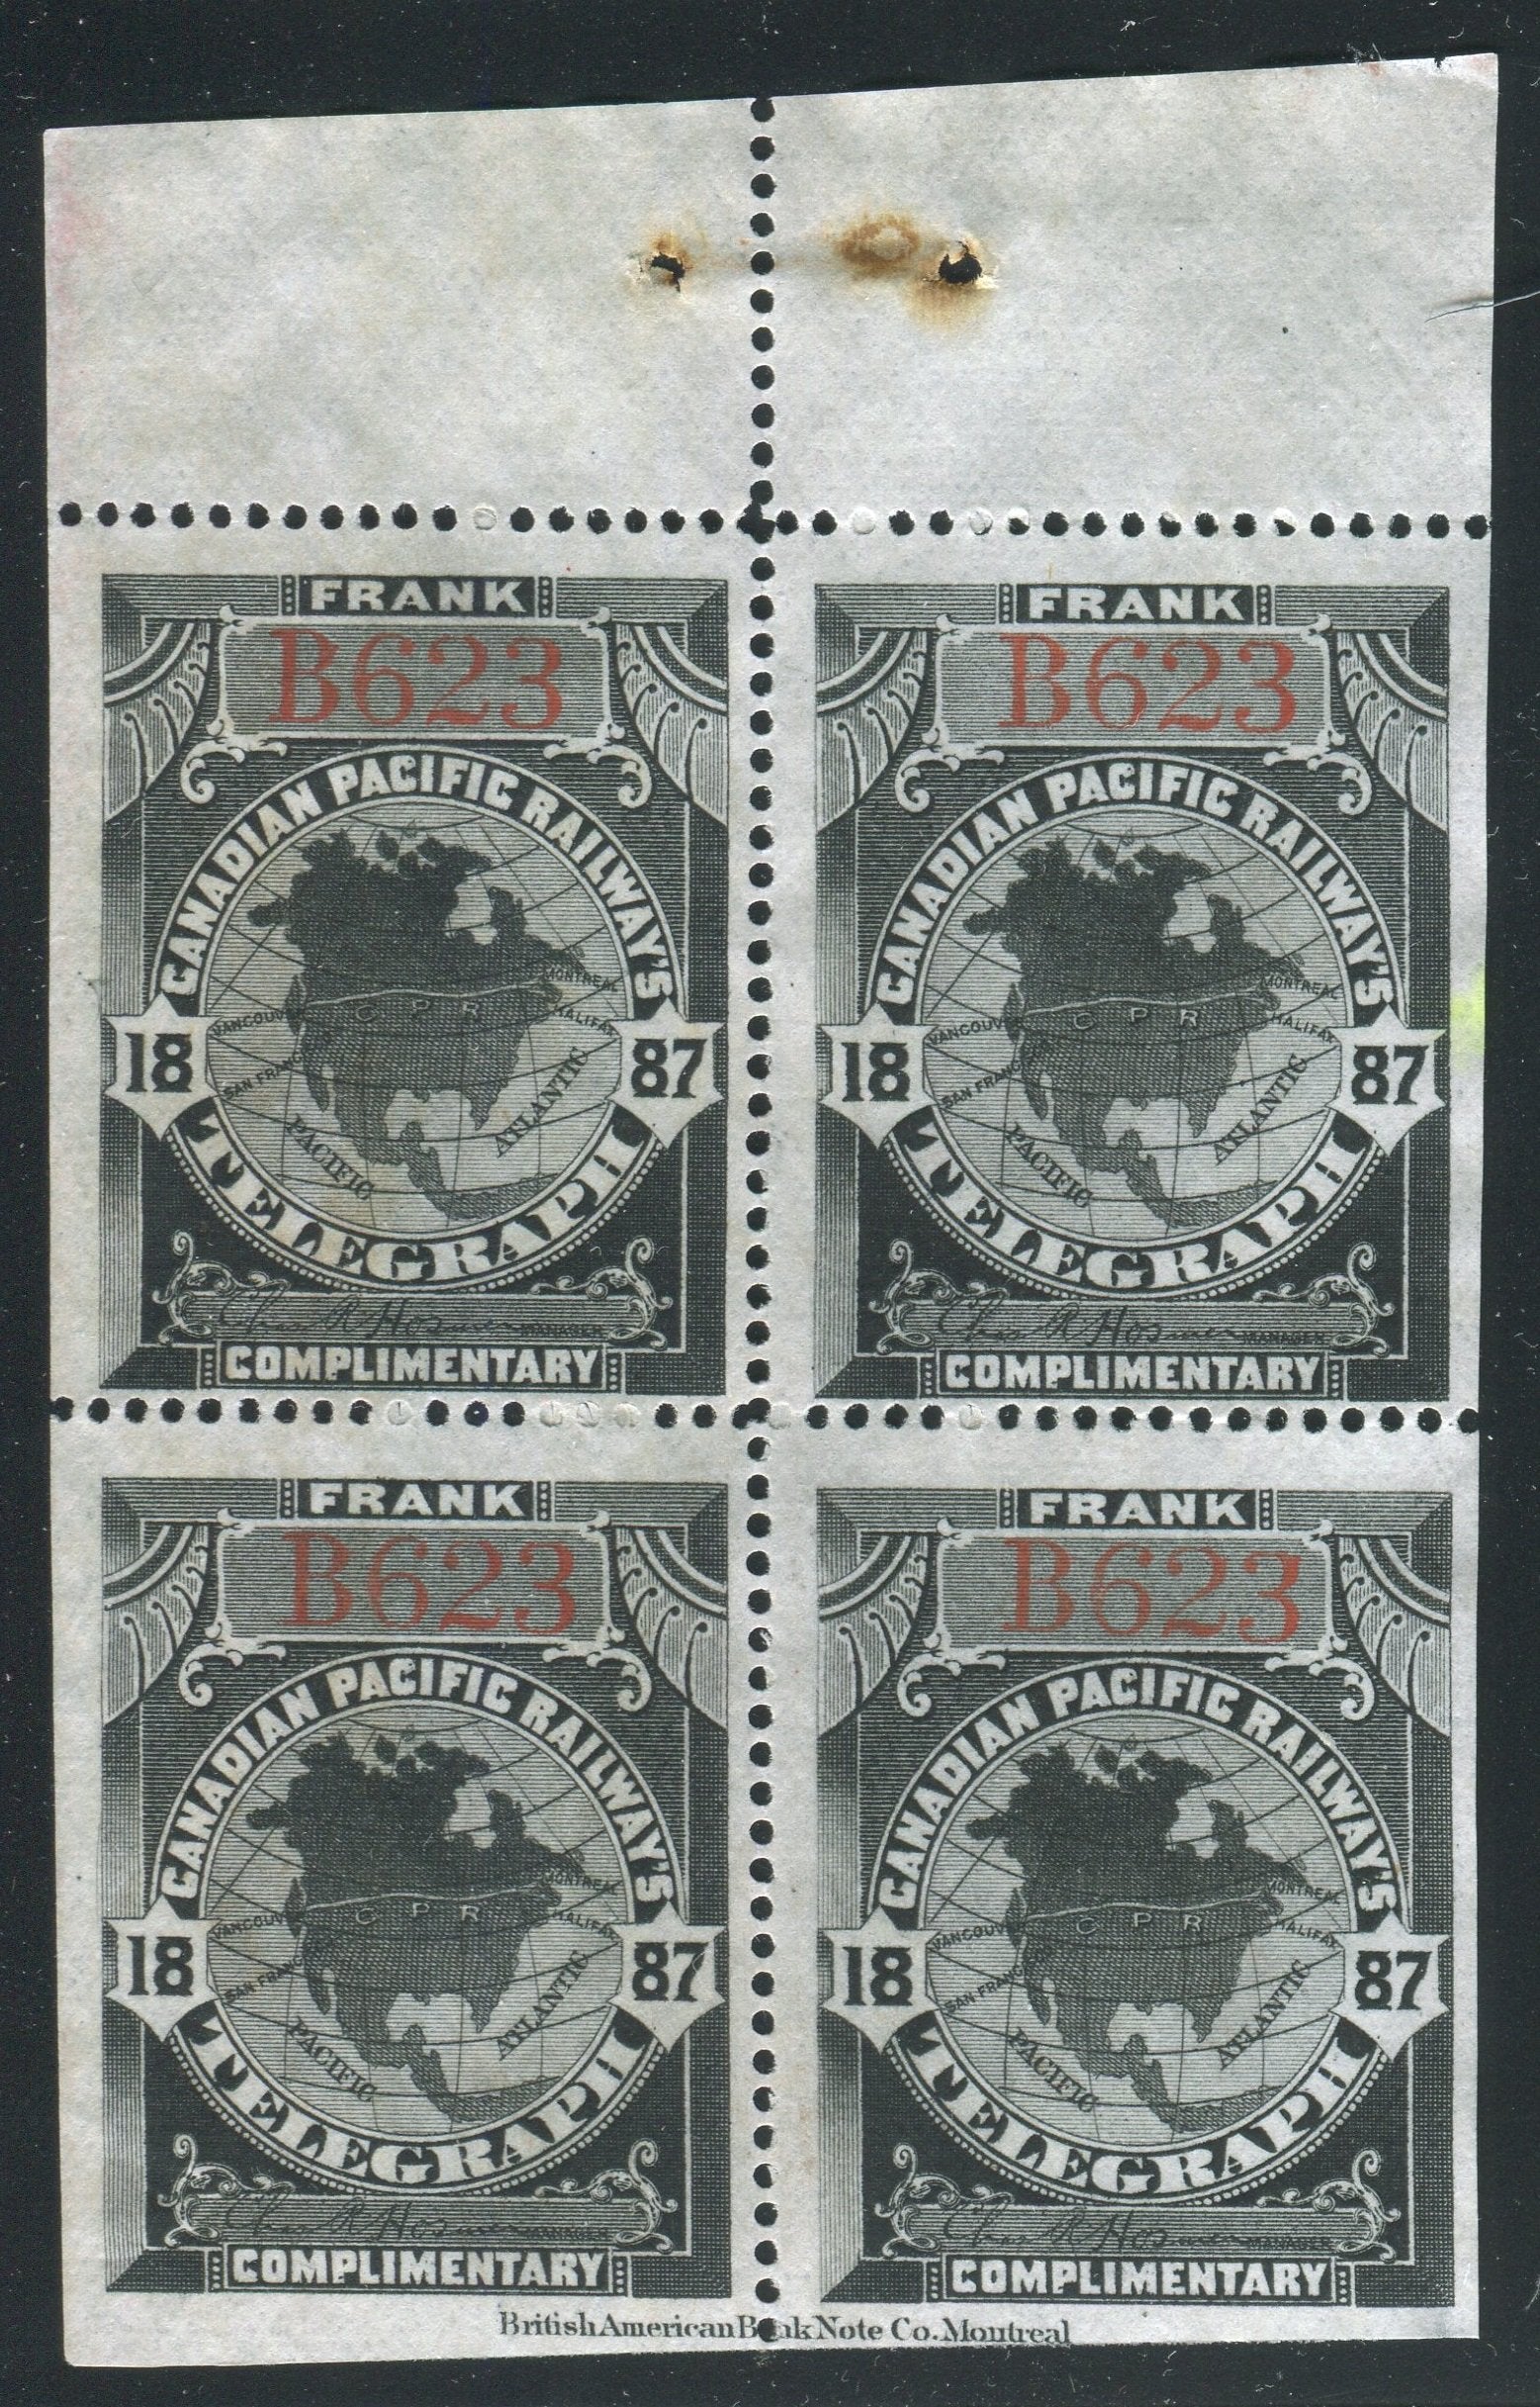 0001CP1710 - TCP1 - Mint Booklet Pane - Deveney Stamps Ltd. Canadian Stamps